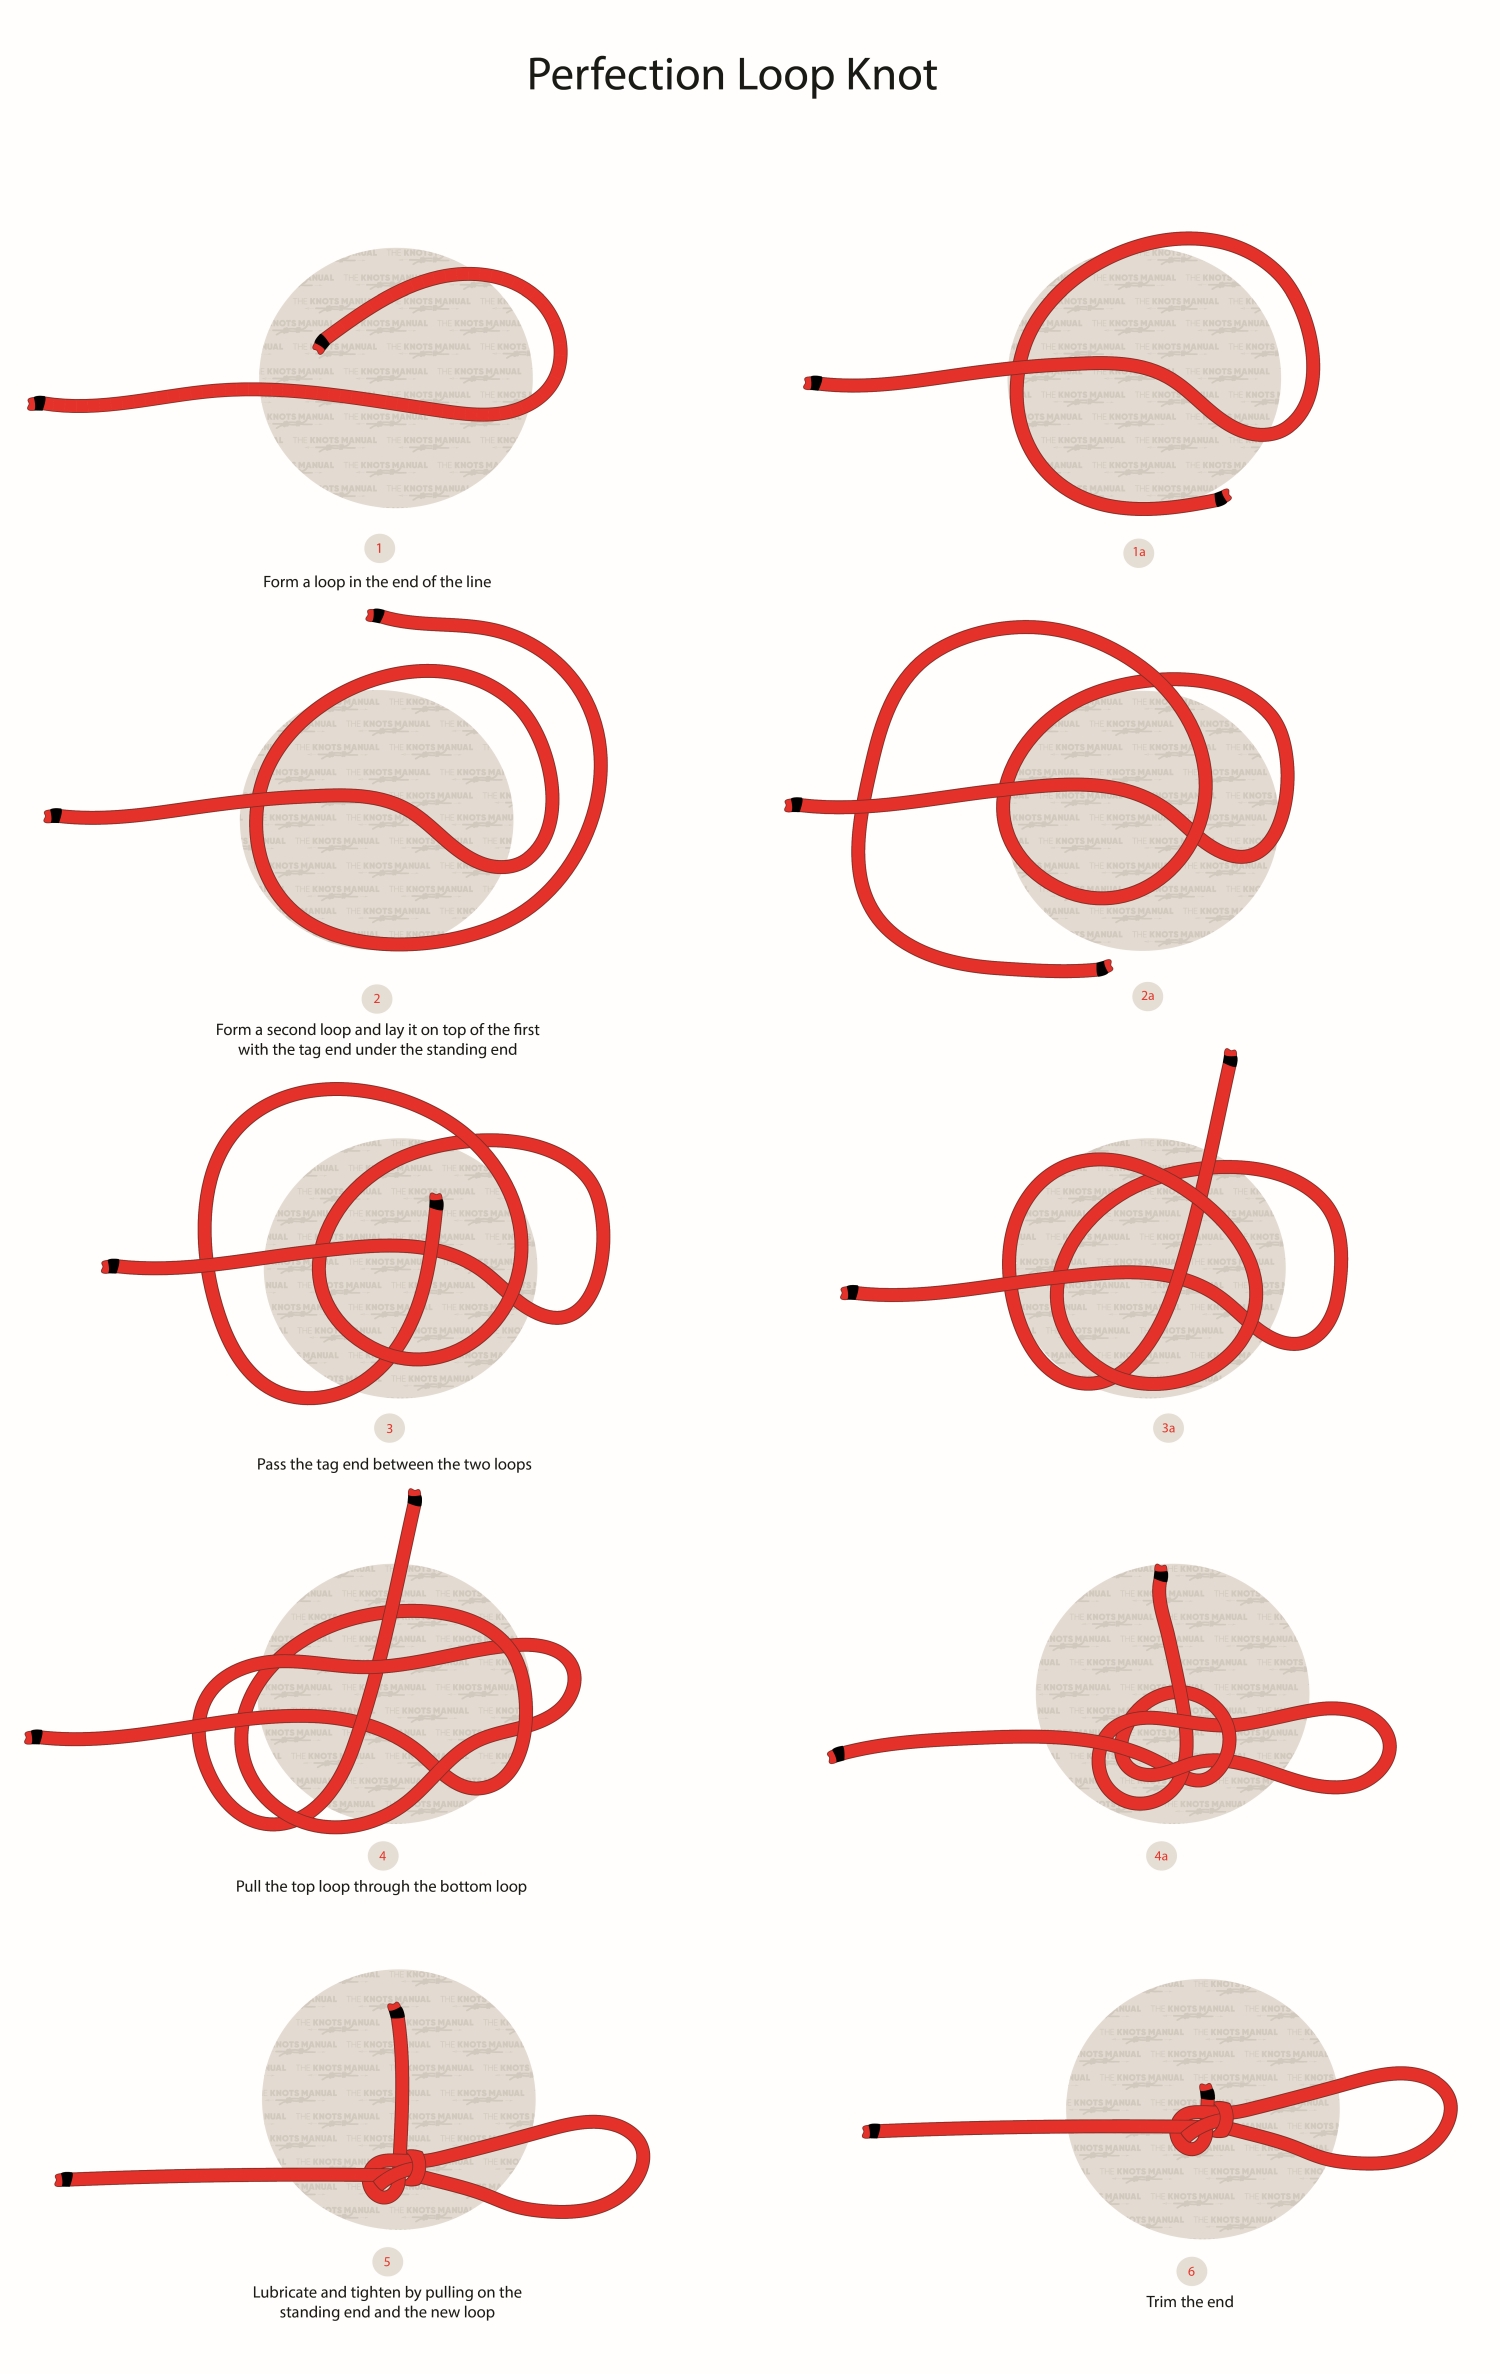 Illustrated Guide: How to Tie a Perfection Loop Knot